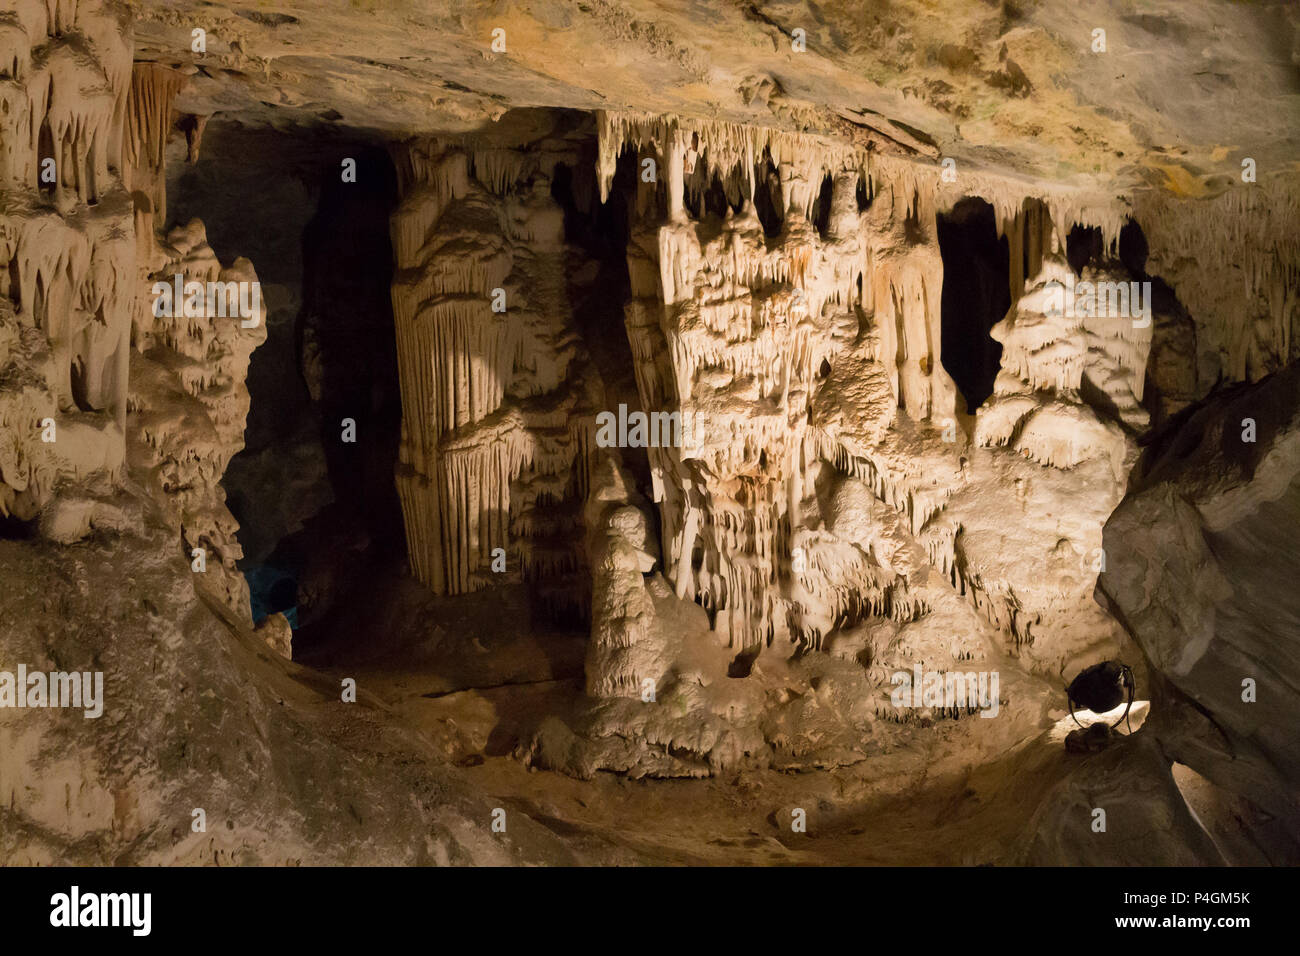 Inside view of Cango Caves in Oudtshoorn South Africa. African landmark. Travel destination Stock Photo